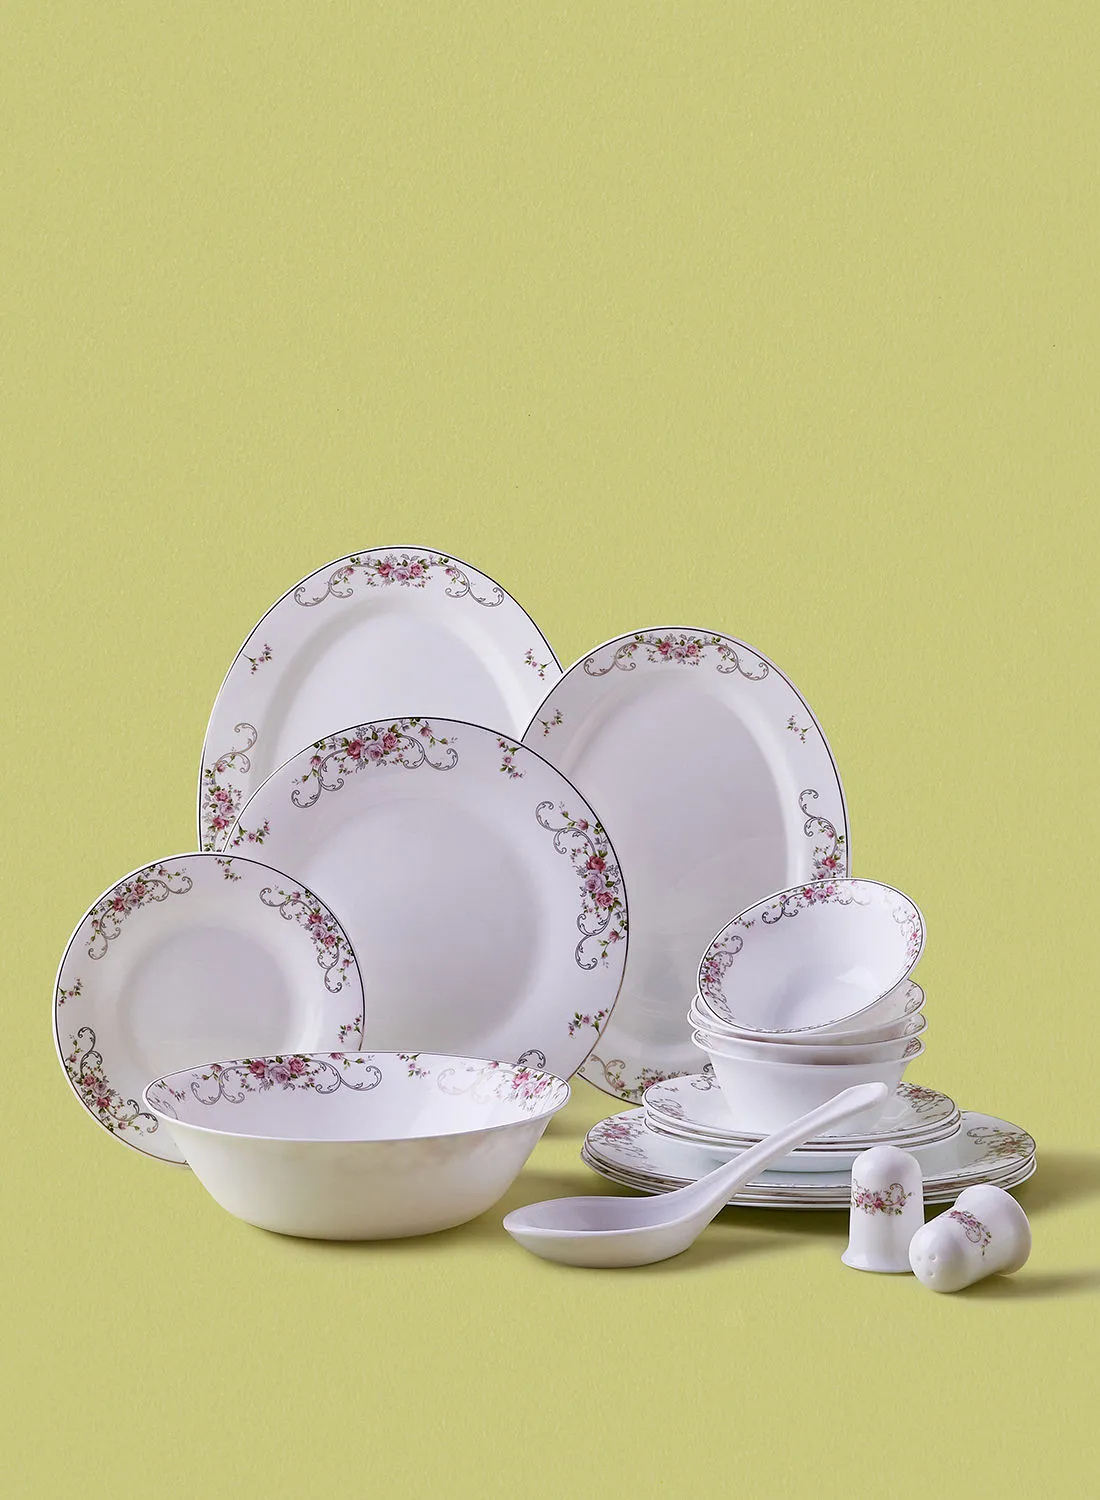 noon east 18 Piece Opalware Dinner Set - Light Weight Dishes, Plates - Dinner Plate, Side Plate, Bowl, Serving Dish And Bowl - Serves 4 - Festive Design Orchid Gold